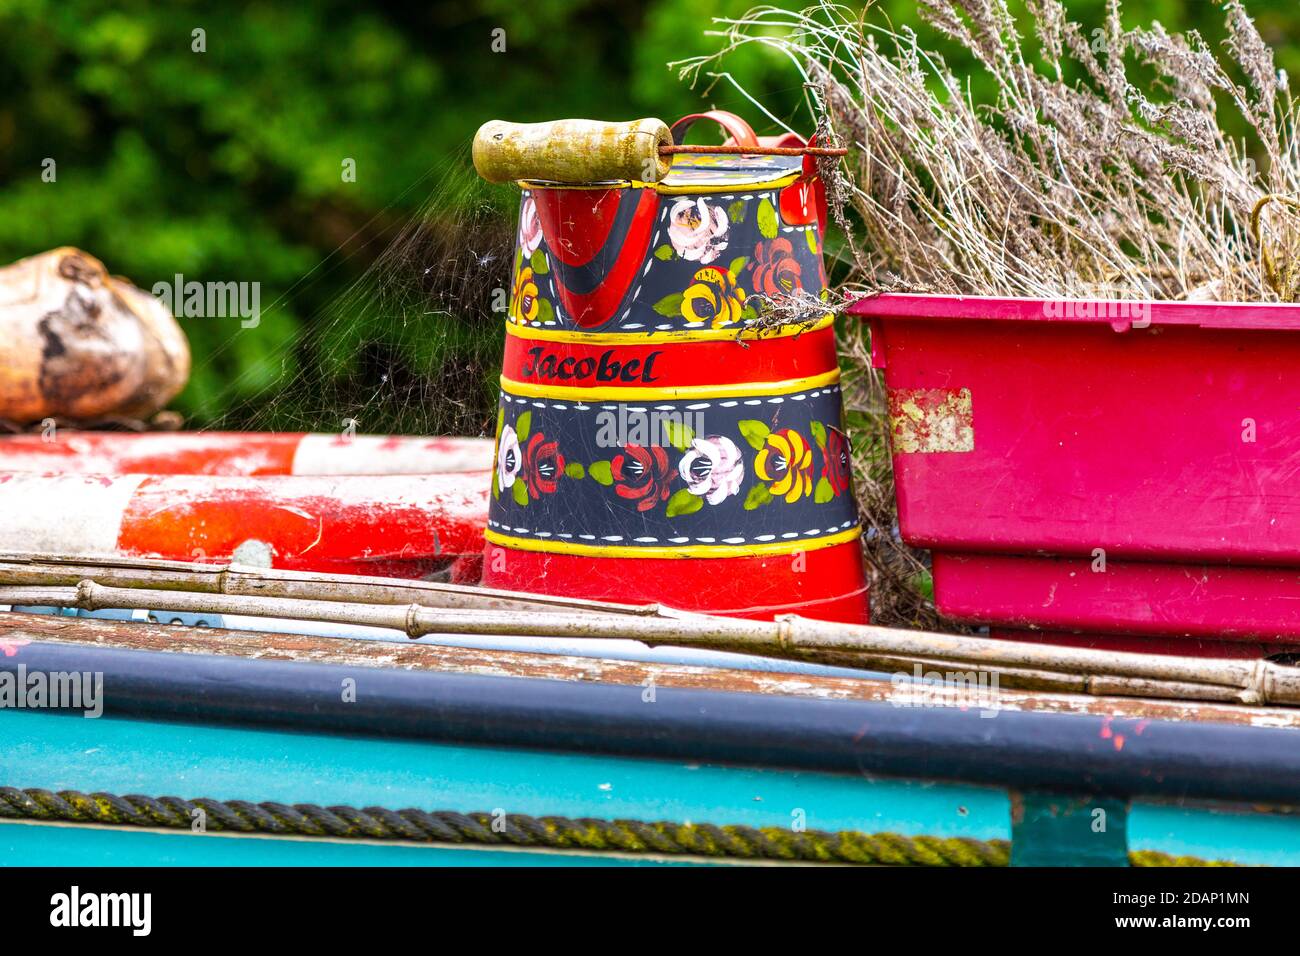 Bucket on top of a naoorboat painted in the folk roses & castles style, Grand Union Canal, Colne Valley, UK Stock Photo